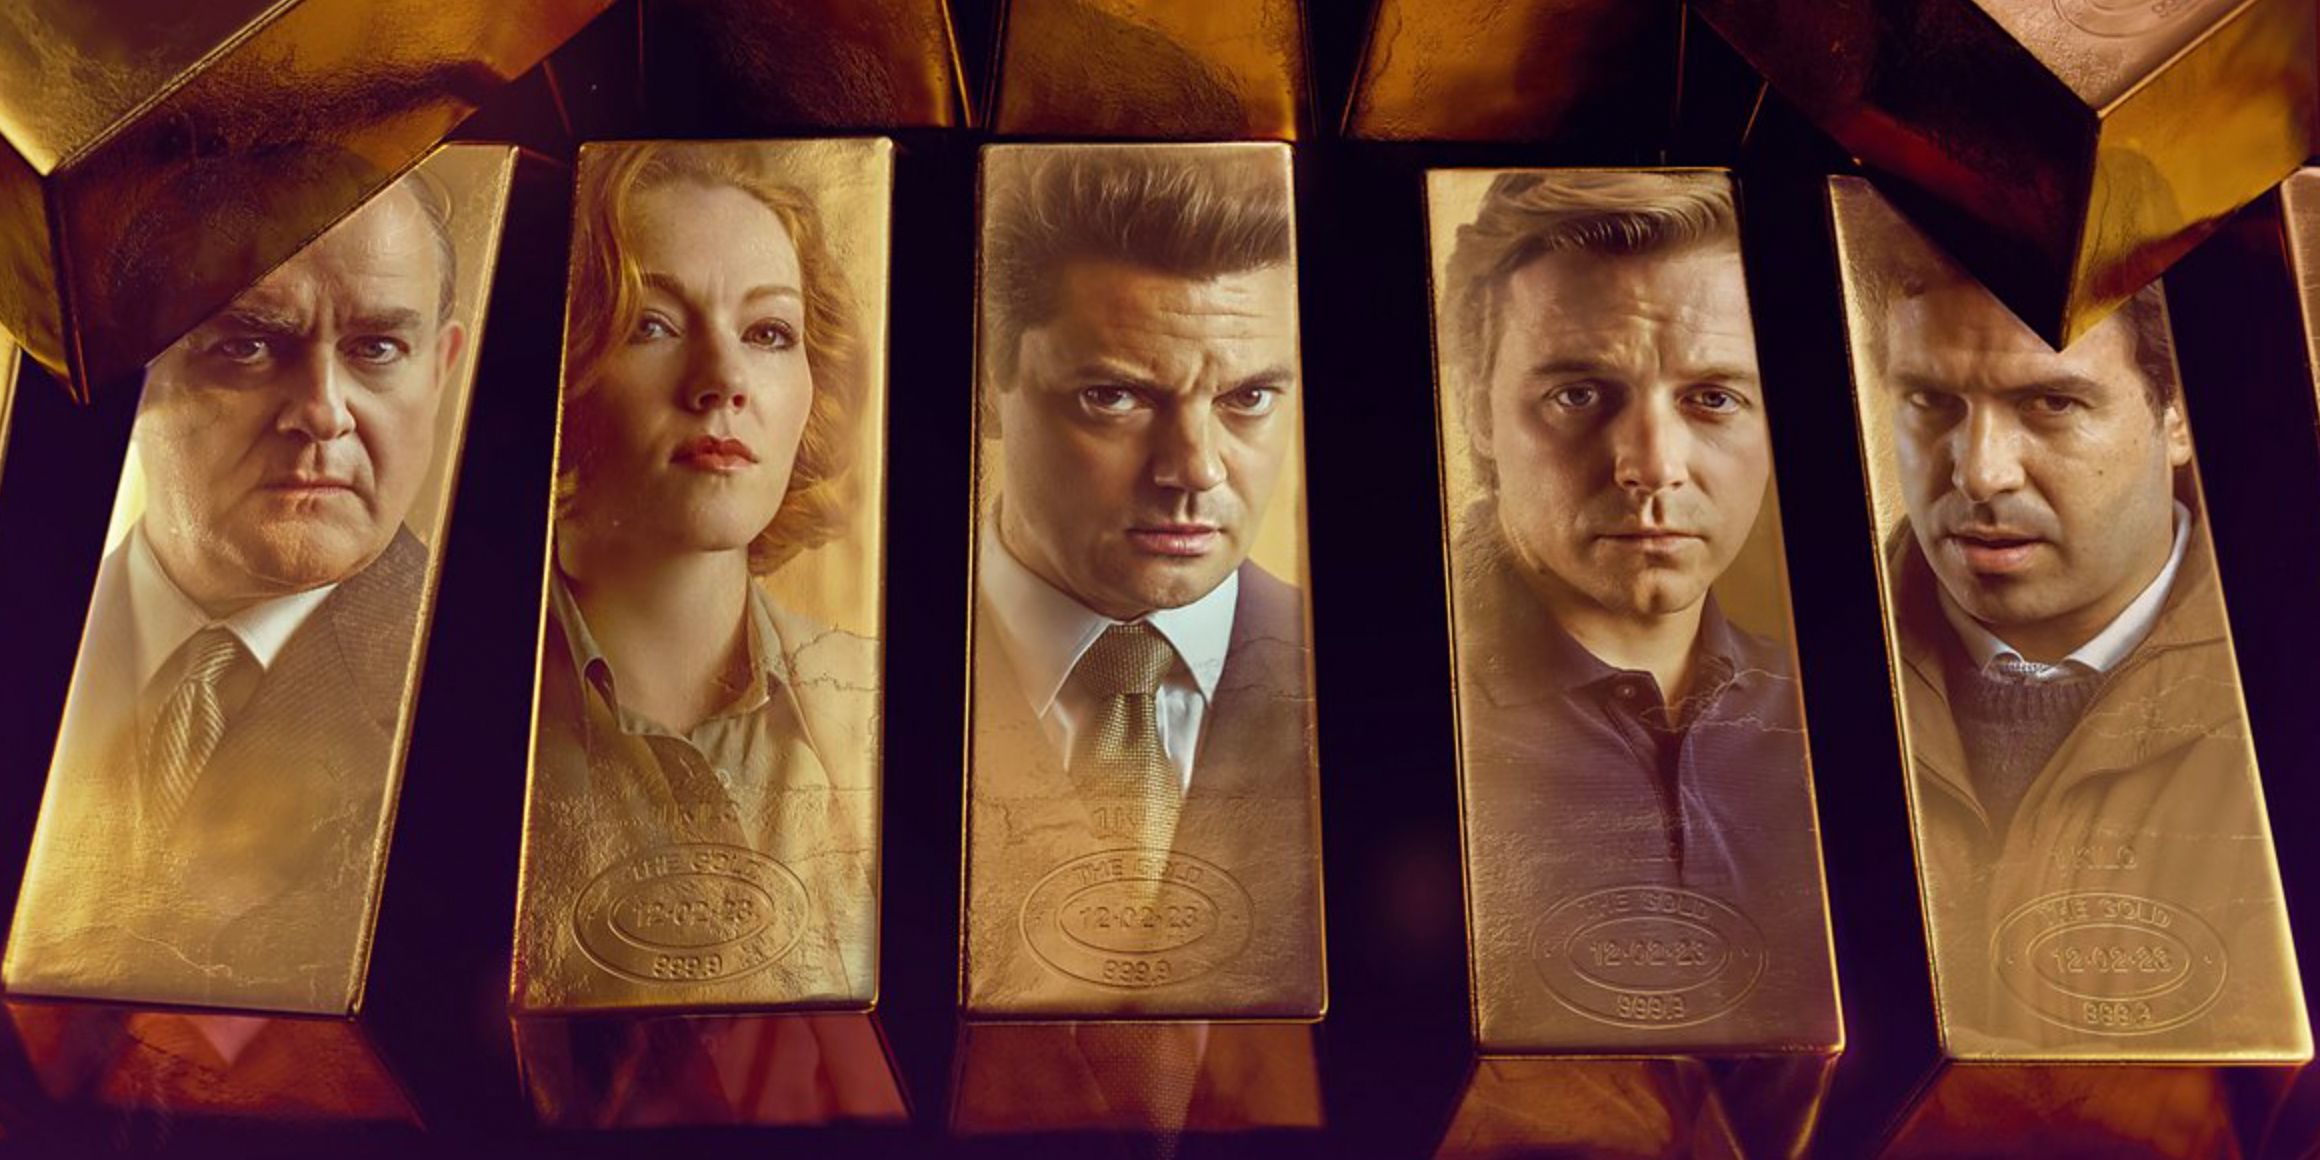 Character faces on gold bars for the limited BBC series Gold